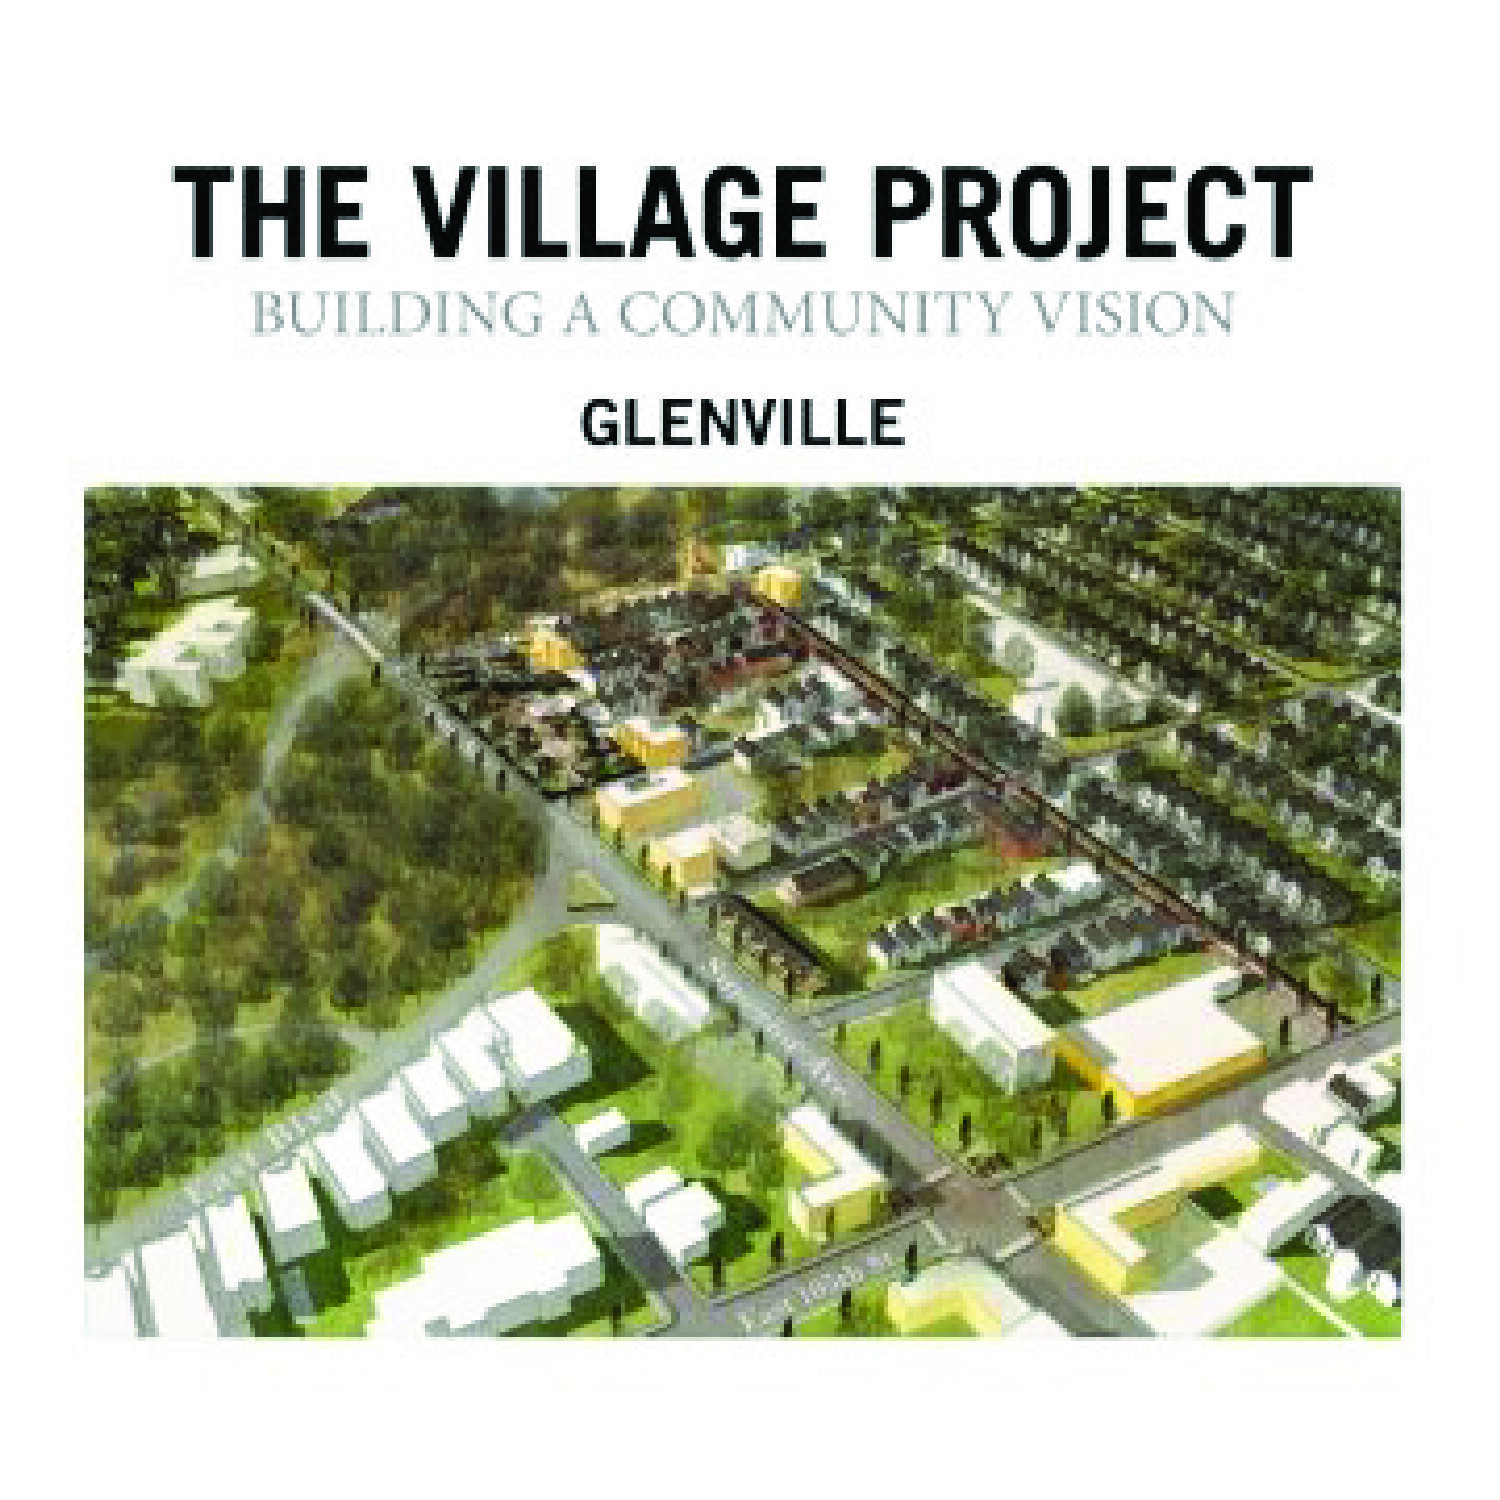 Village Project: Building a Community Vision in Glenville